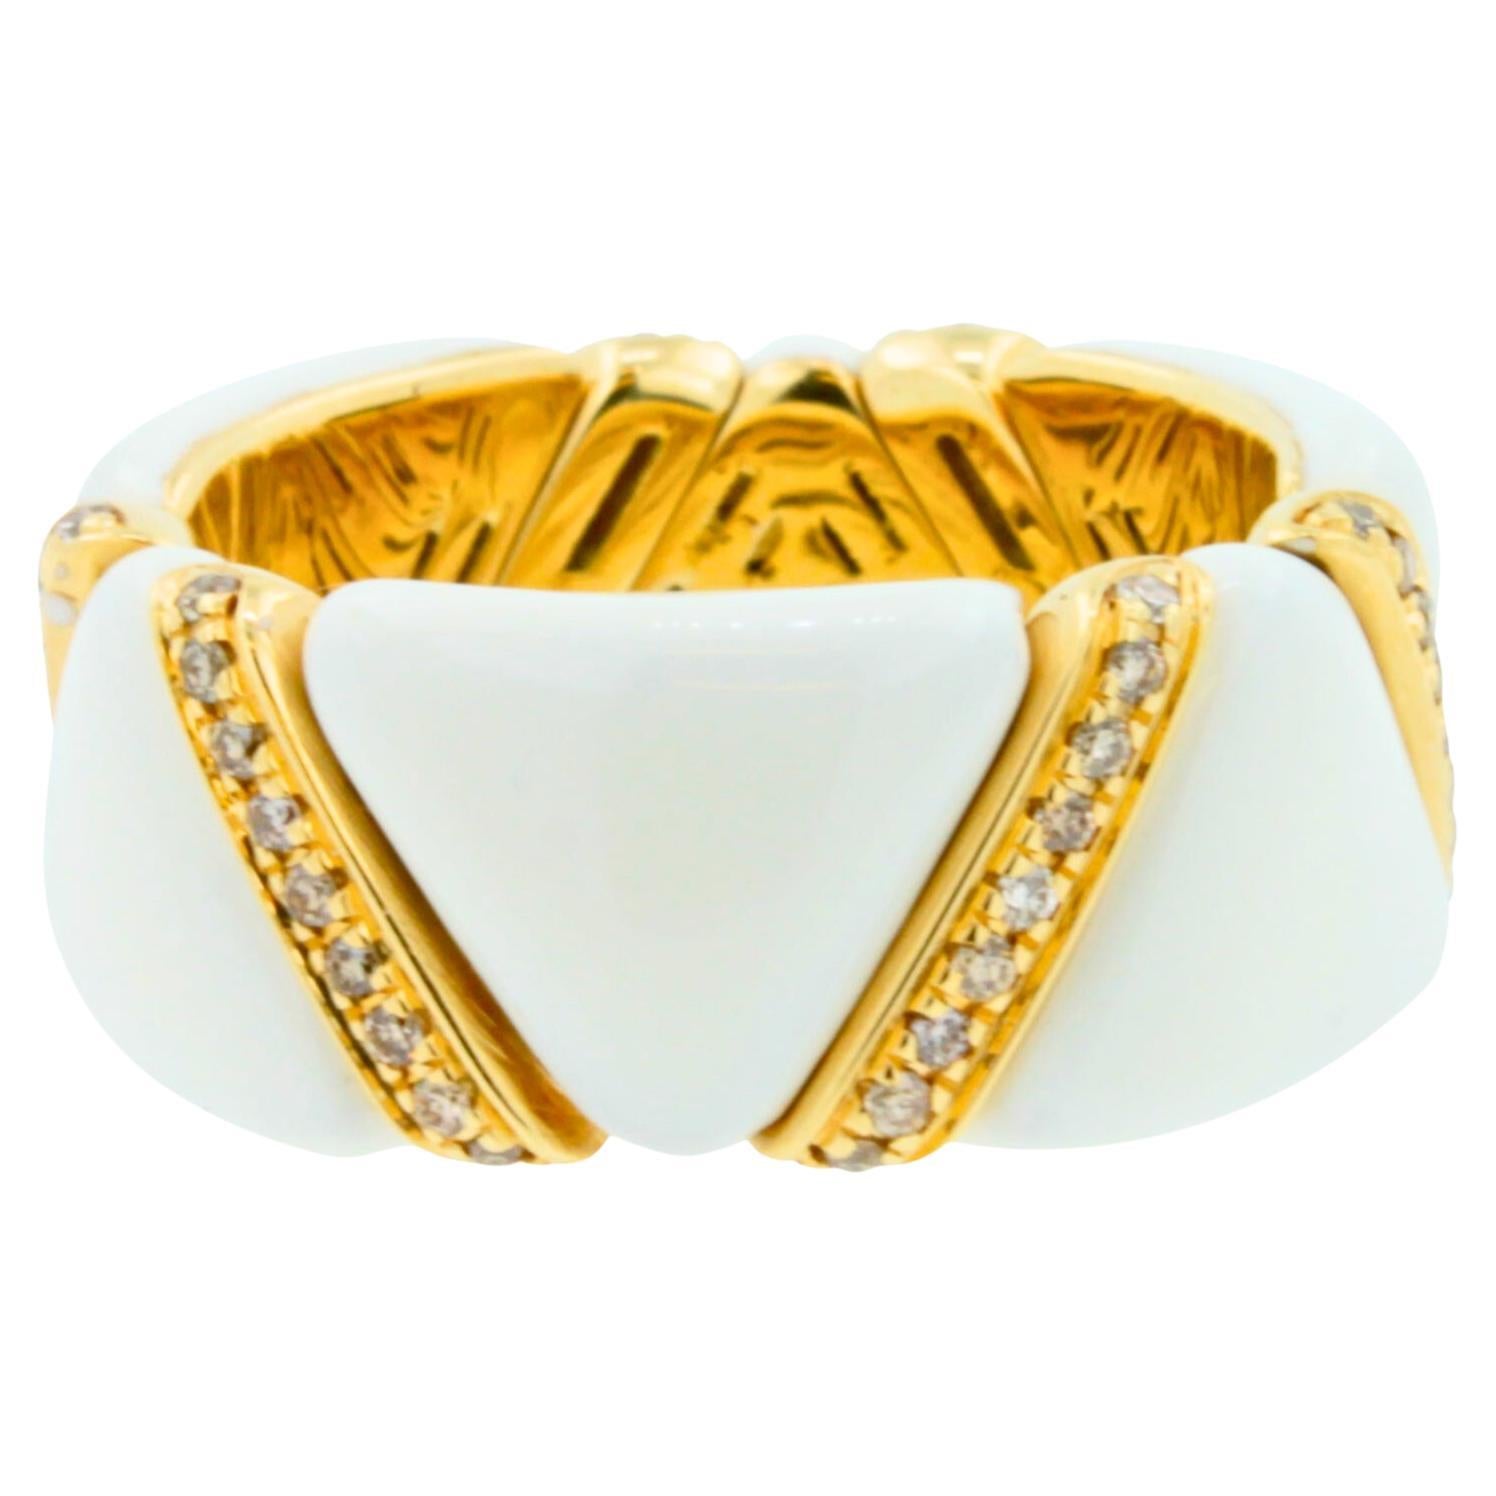 Mixing an art deco aesthetic with contemporary flair, the hand-made rings in pink, white and yellow 18k gold are versatile and feature a unique stretch mechanism. Capturing the fascinating tradition of enameling, the Ez Glaze rings shimmer in serene